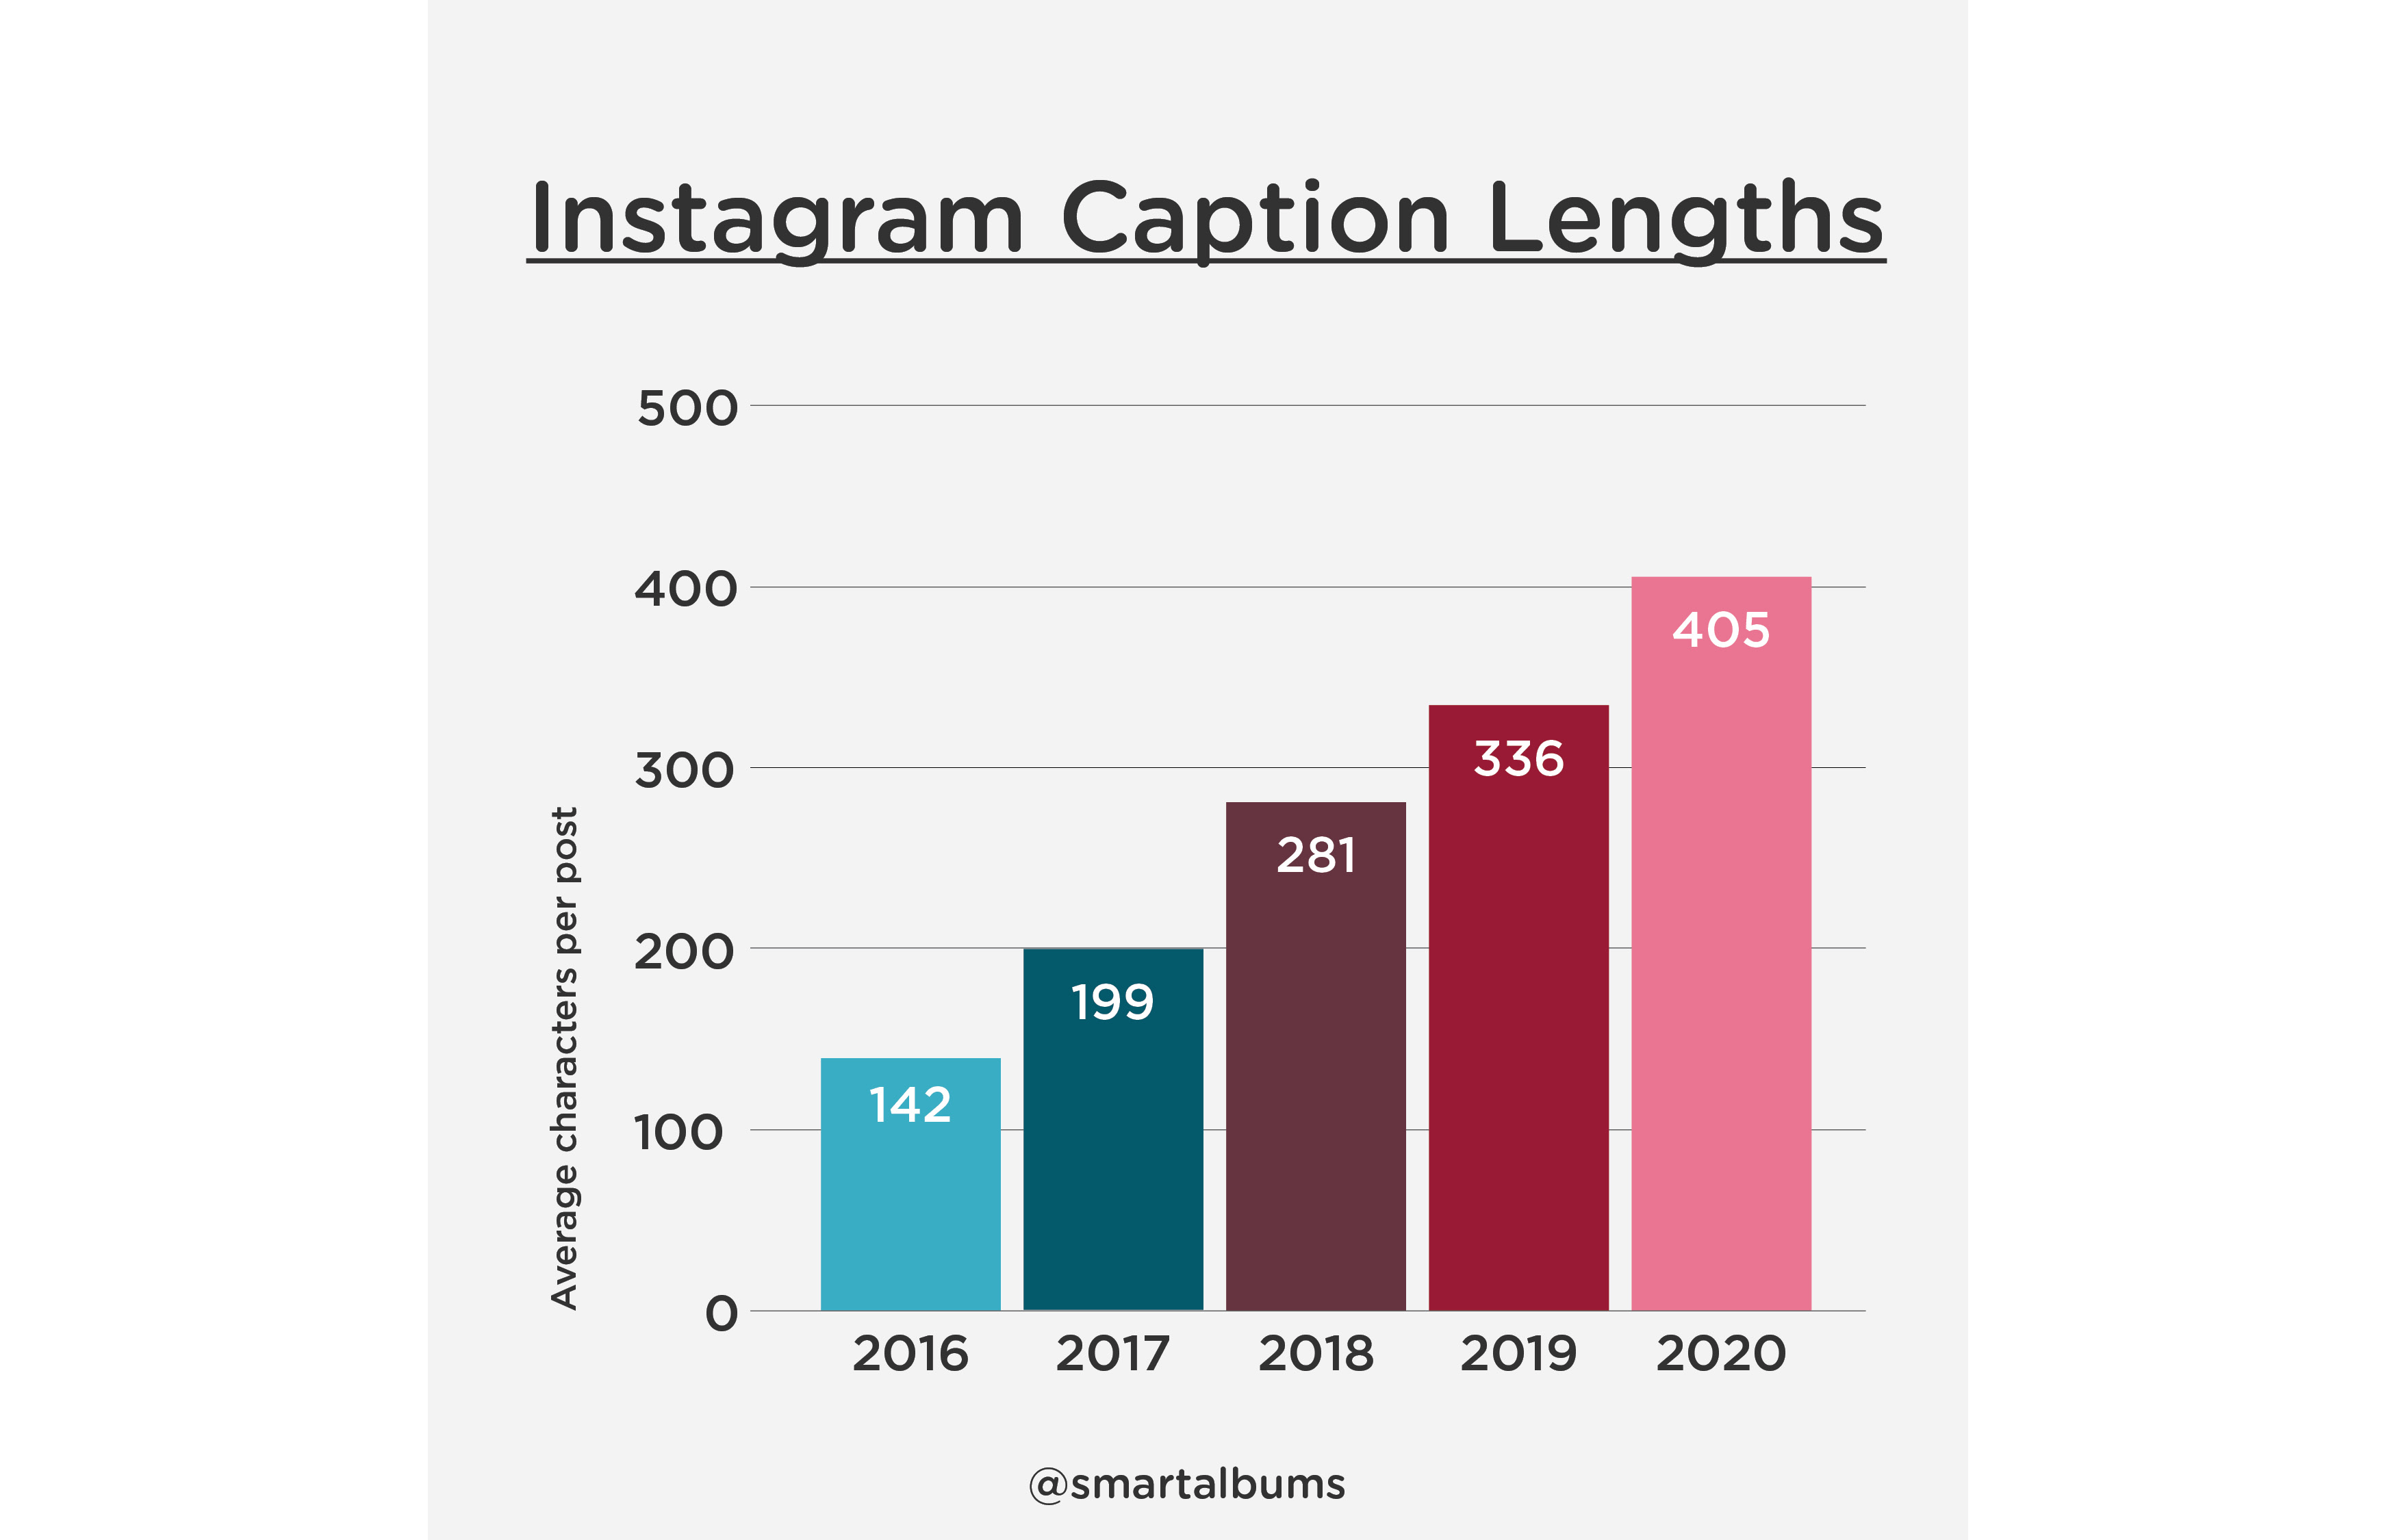 Statistics show that the ideal Instagram captions length is getting longer